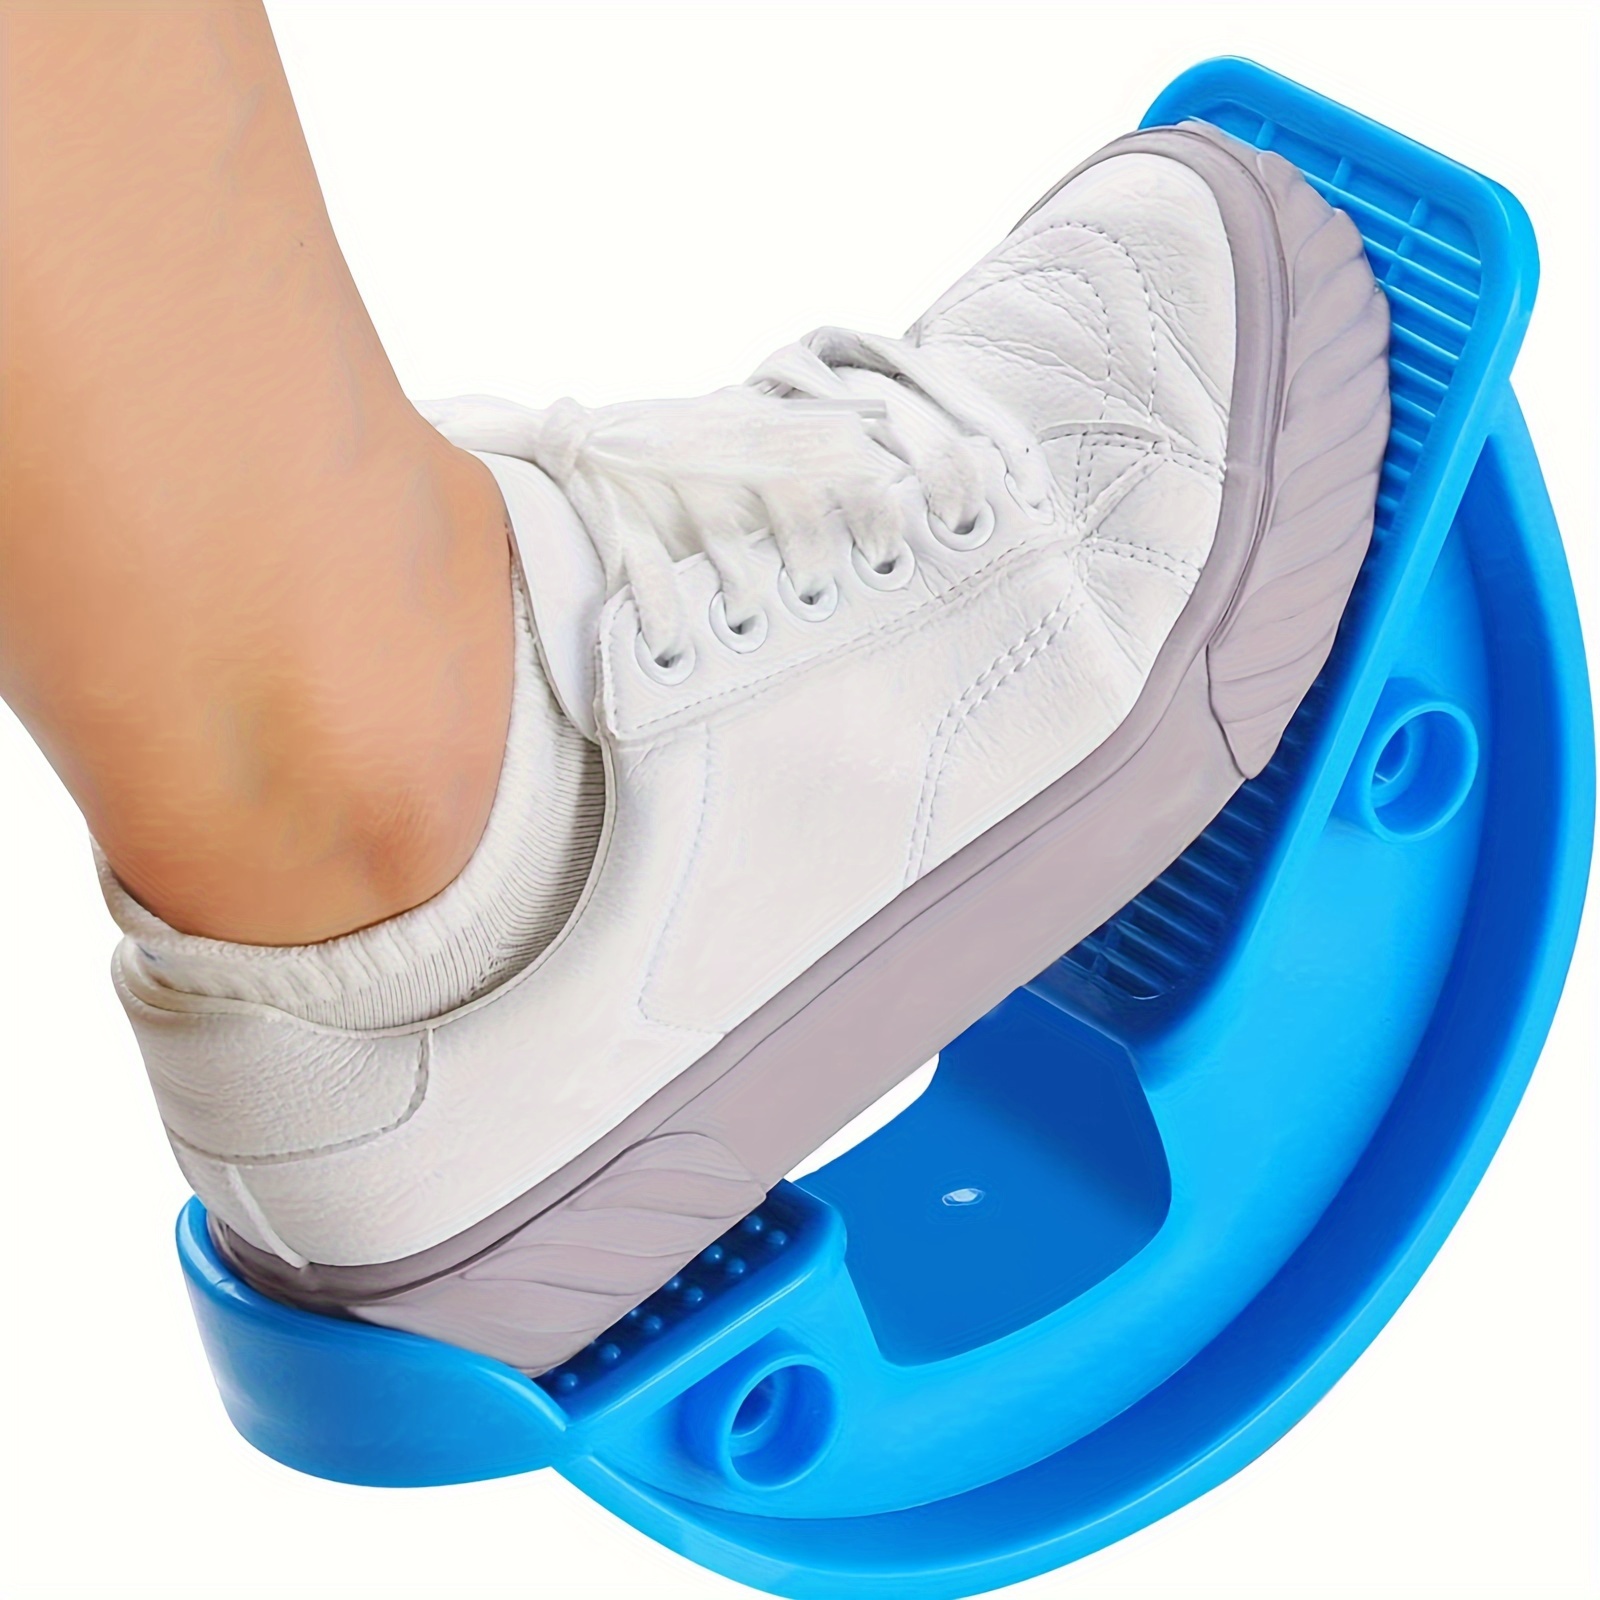 

1pc Foot Pedal, Ankle Plantar Board, For Calf Stretching, Balance & Flexibility Training